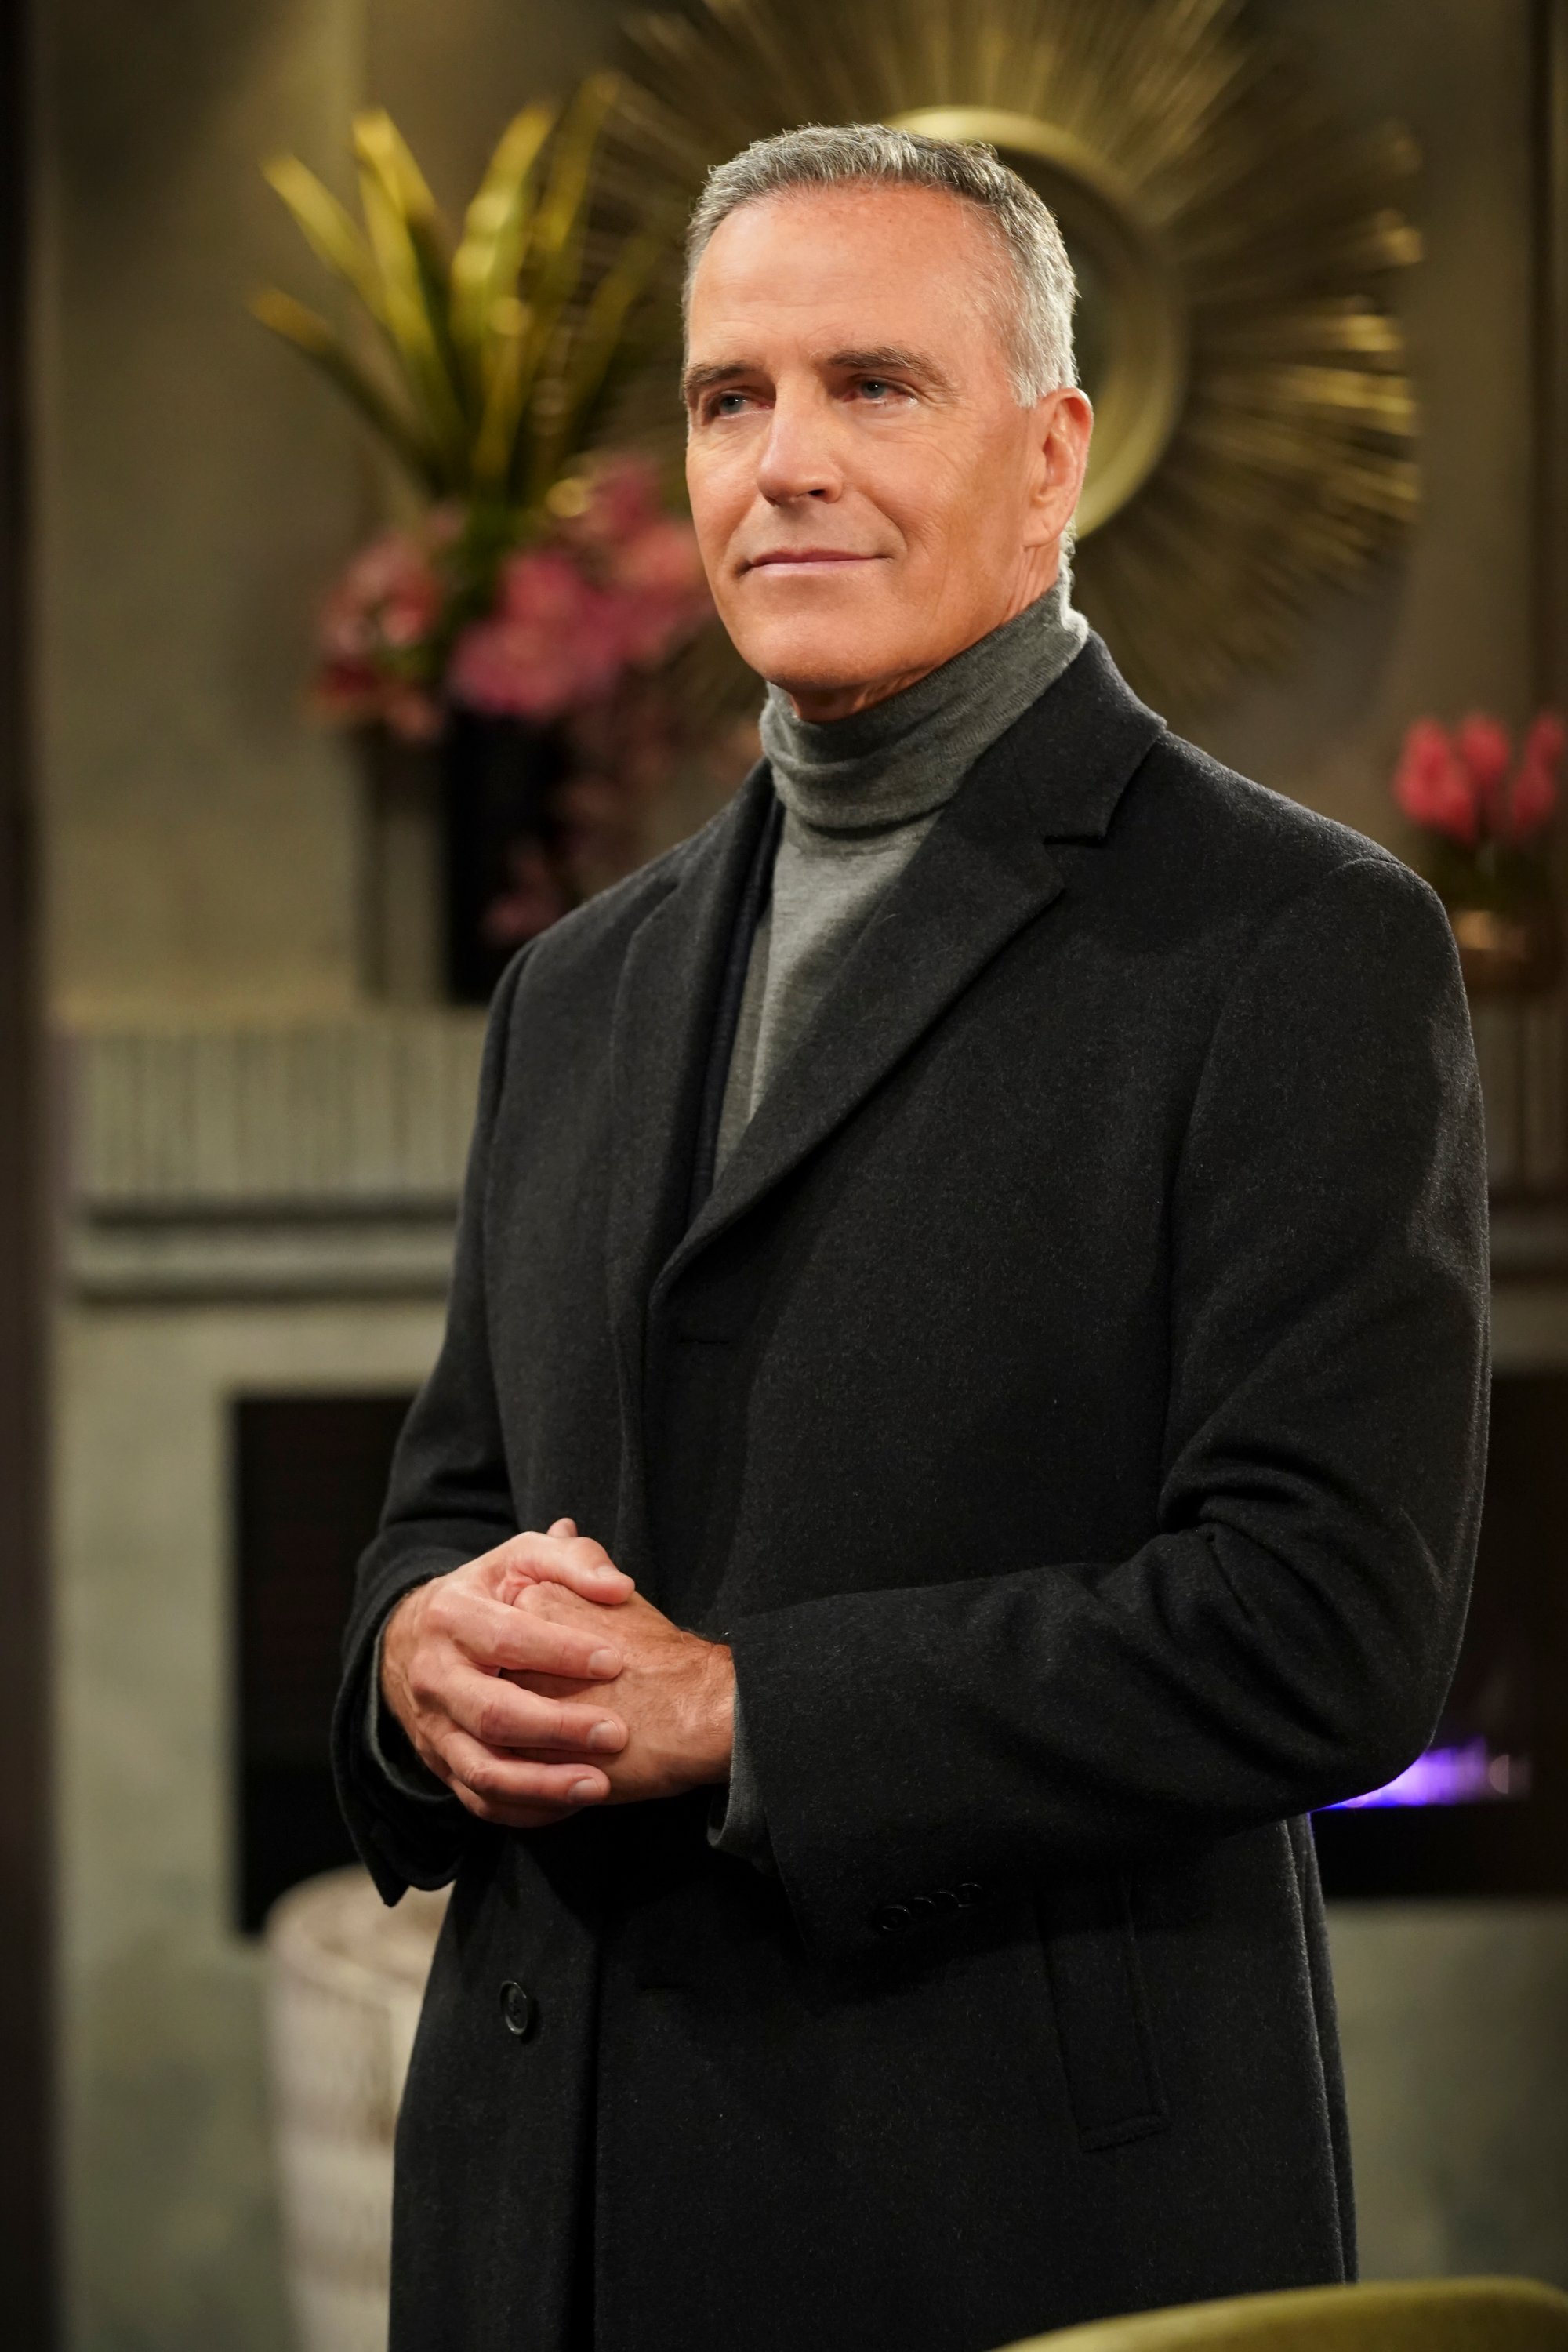 'The Young and the Restless' cast member Richard Burgi in a black suit and grey turtleneck on set of the CBS soap opera.